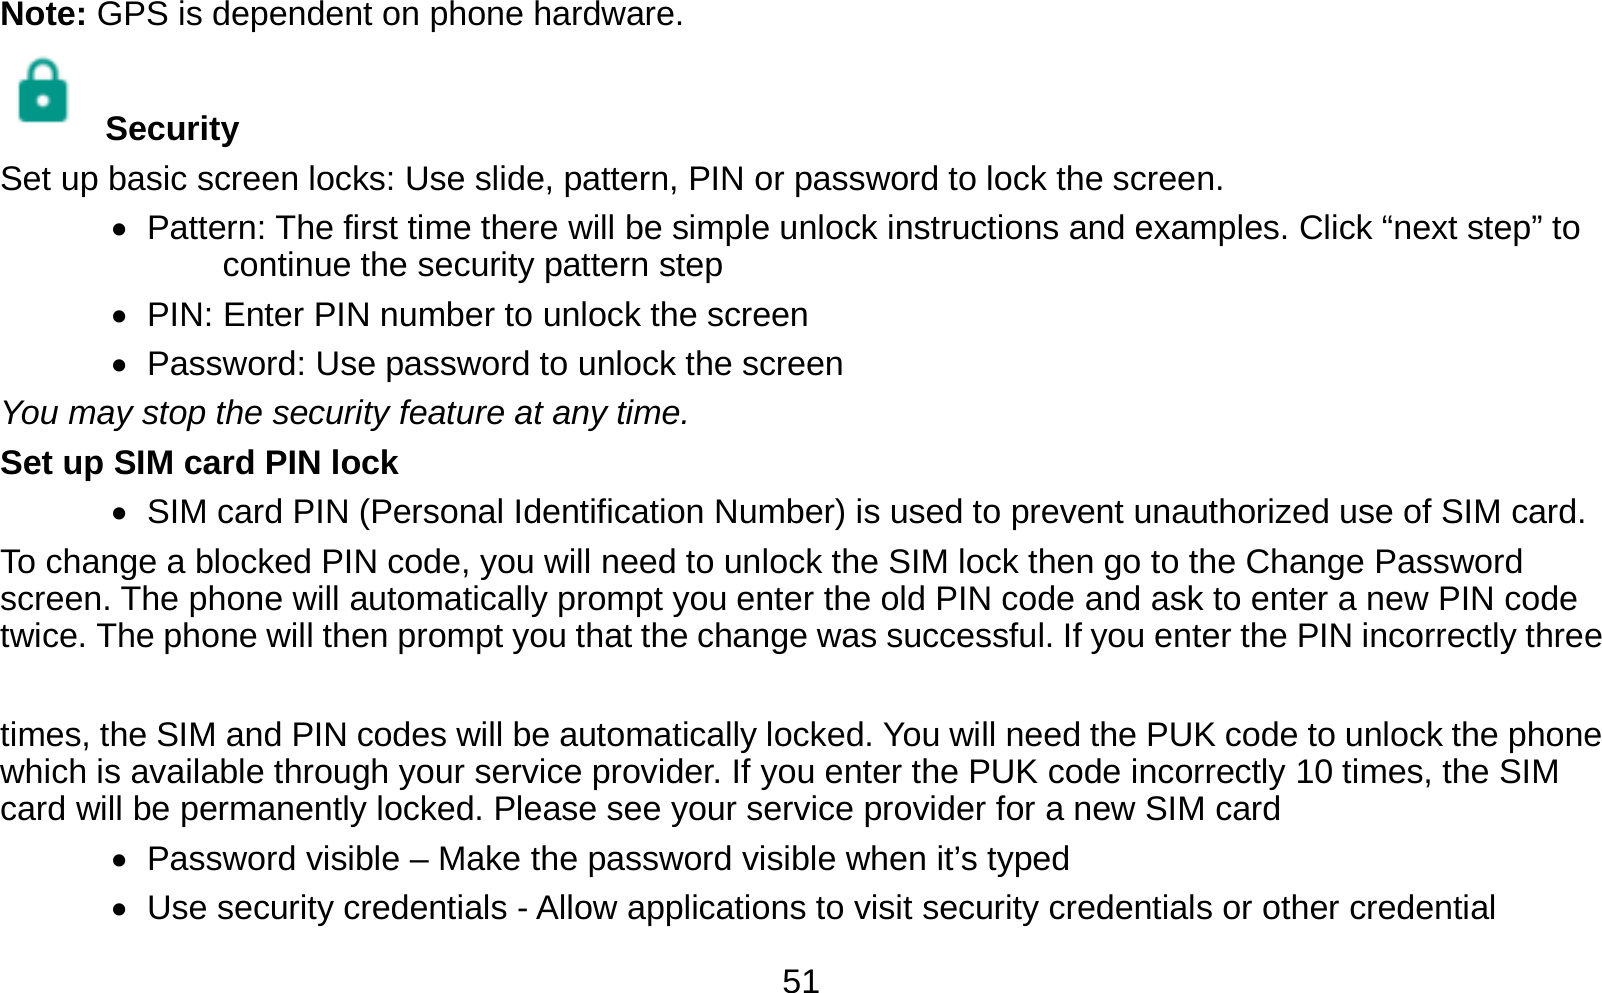   51Note: GPS is dependent on phone hardware.  Security  Set up basic screen locks: Use slide, pattern, PIN or password to lock the screen.      Pattern: The first time there will be simple unlock instructions and examples. Click “next step” to continue the security pattern step    PIN: Enter PIN number to unlock the screen    Password: Use password to unlock the screen You may stop the security feature at any time. Set up SIM card PIN lock    SIM card PIN (Personal Identification Number) is used to prevent unauthorized use of SIM card.   To change a blocked PIN code, you will need to unlock the SIM lock then go to the Change Password screen. The phone will automatically prompt you enter the old PIN code and ask to enter a new PIN code twice. The phone will then prompt you that the change was successful. If you enter the PIN incorrectly three    times, the SIM and PIN codes will be automatically locked. You will need the PUK code to unlock the phone which is available through your service provider. If you enter the PUK code incorrectly 10 times, the SIM card will be permanently locked. Please see your service provider for a new SIM card    Password visible – Make the password visible when it’s typed    Use security credentials - Allow applications to visit security credentials or other credential 